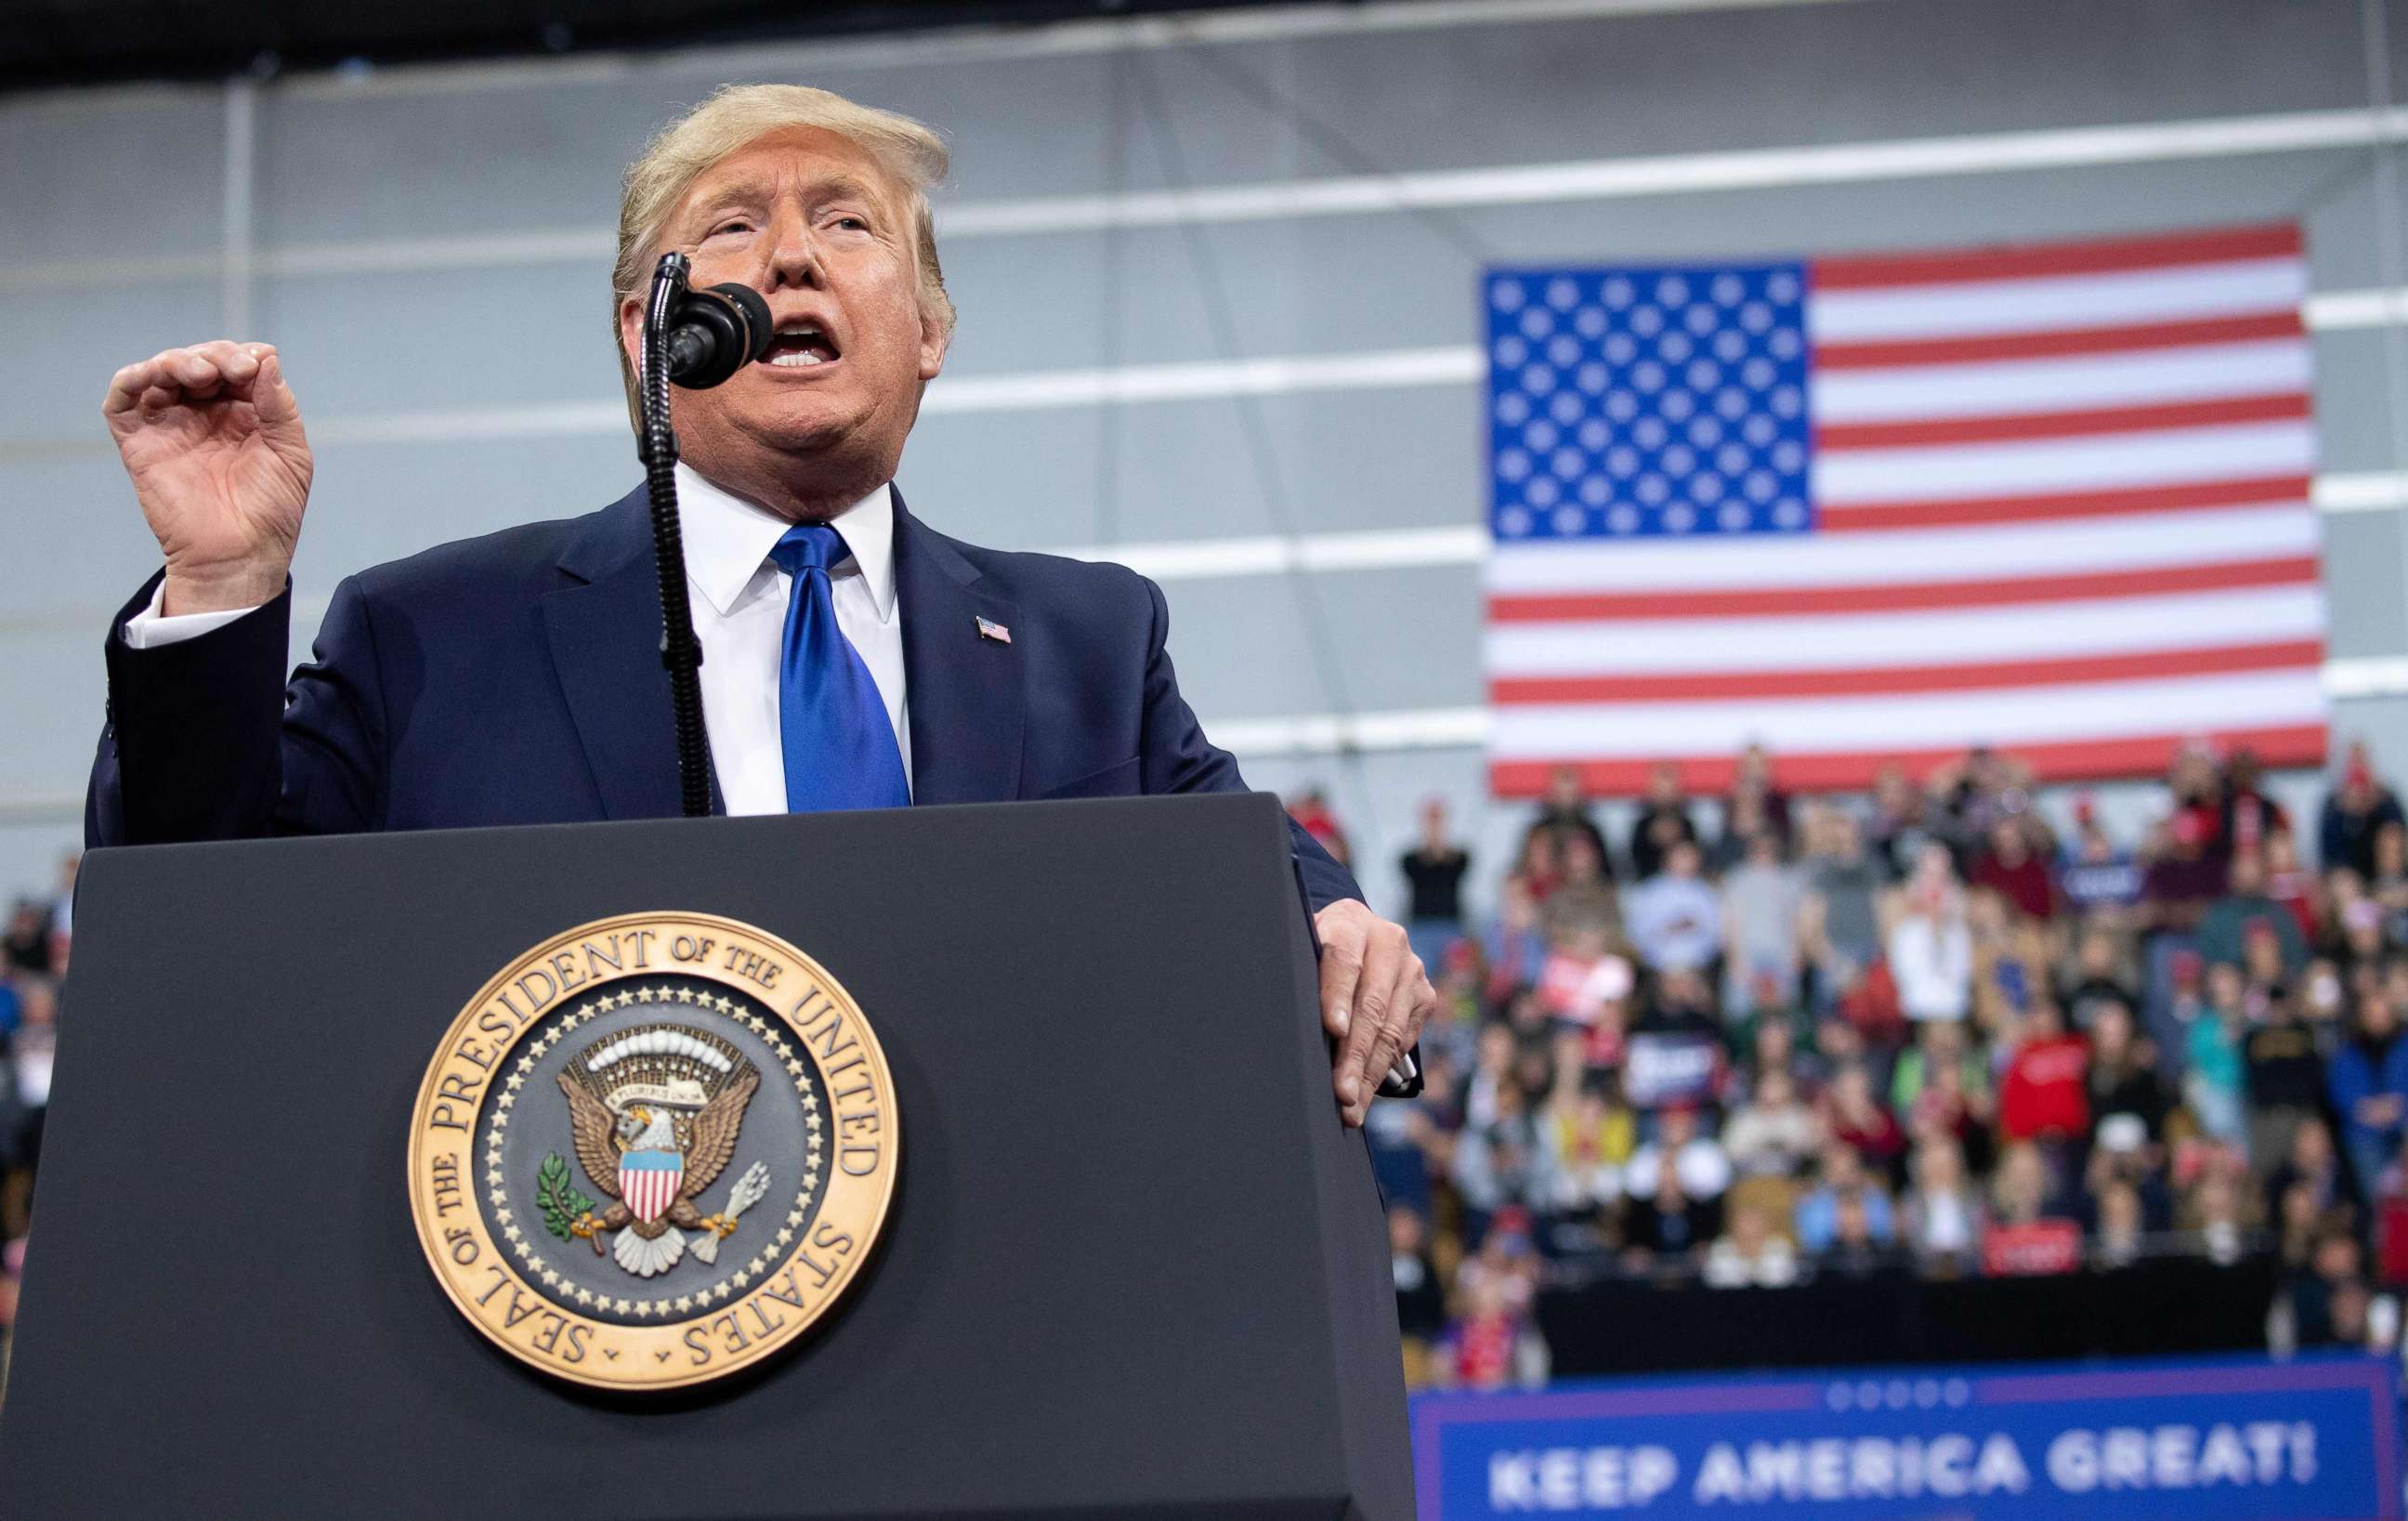 PHOTO: President Donald Trump speaks during a "Keep America Great" campaign rally in Milwaukee, Jan. 14, 2020.